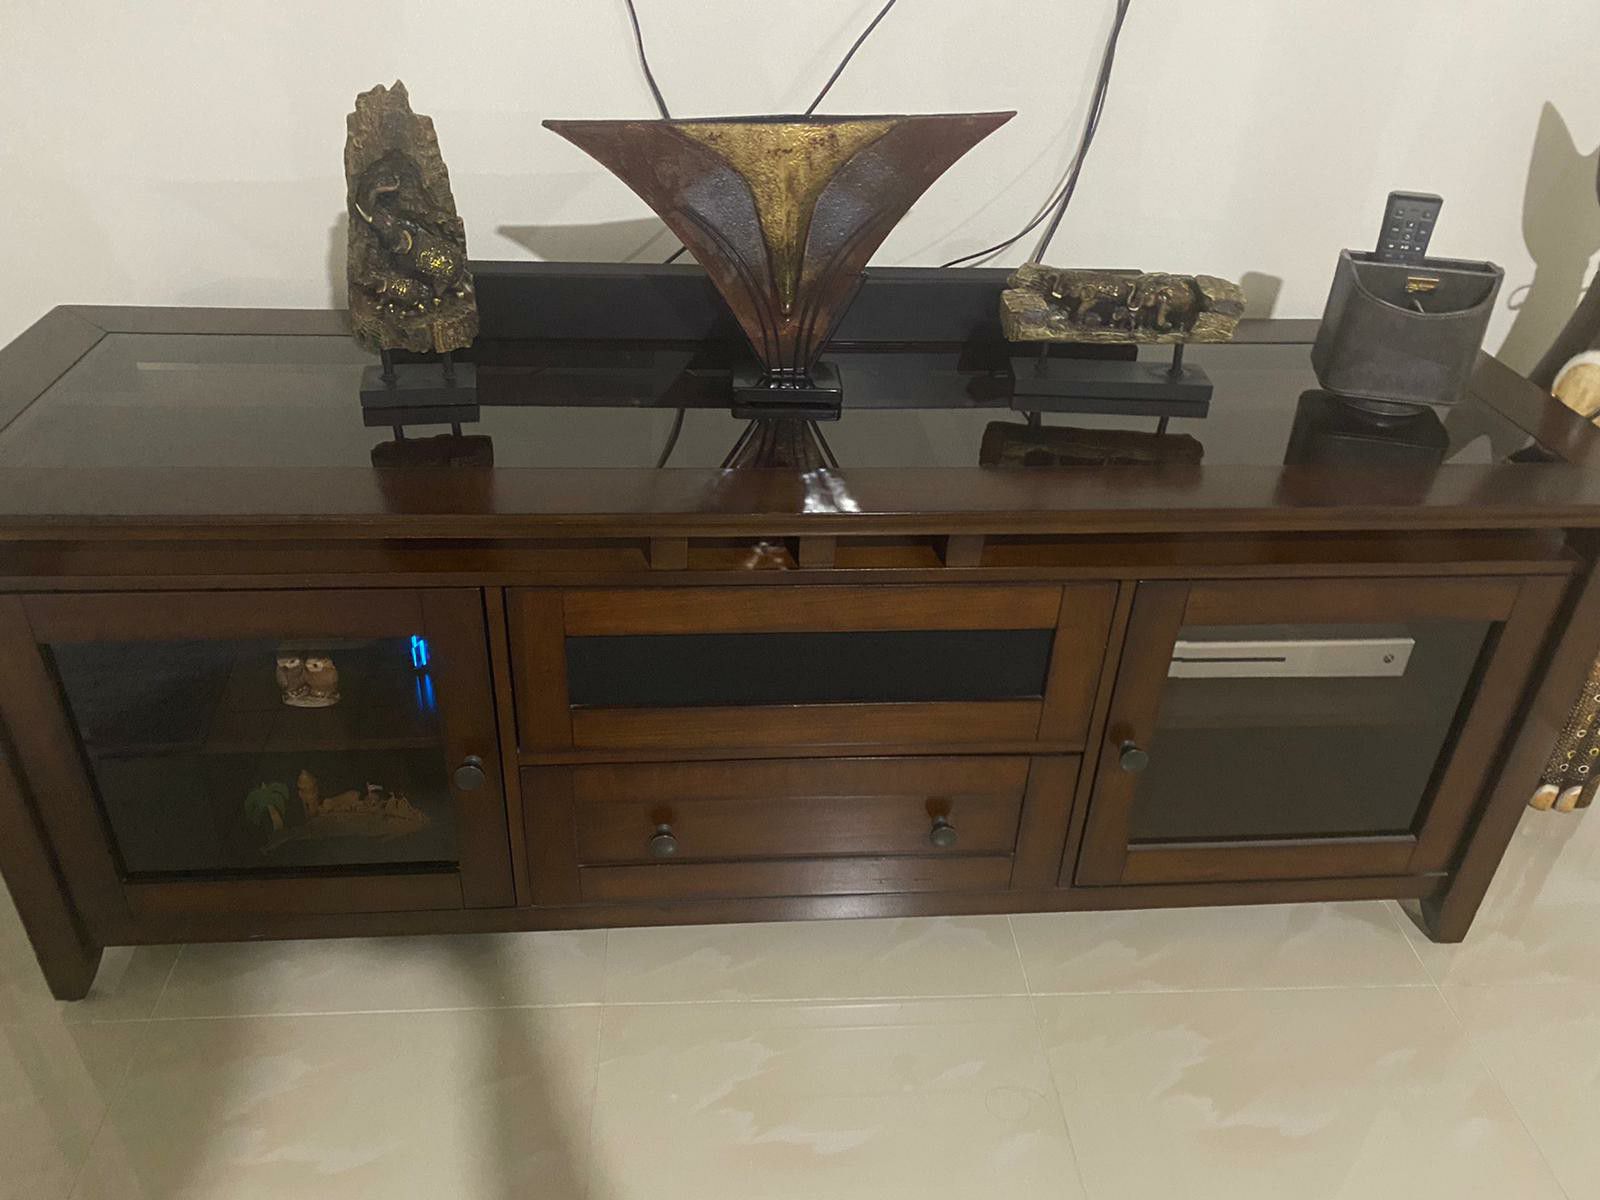 Tv stand solid wood